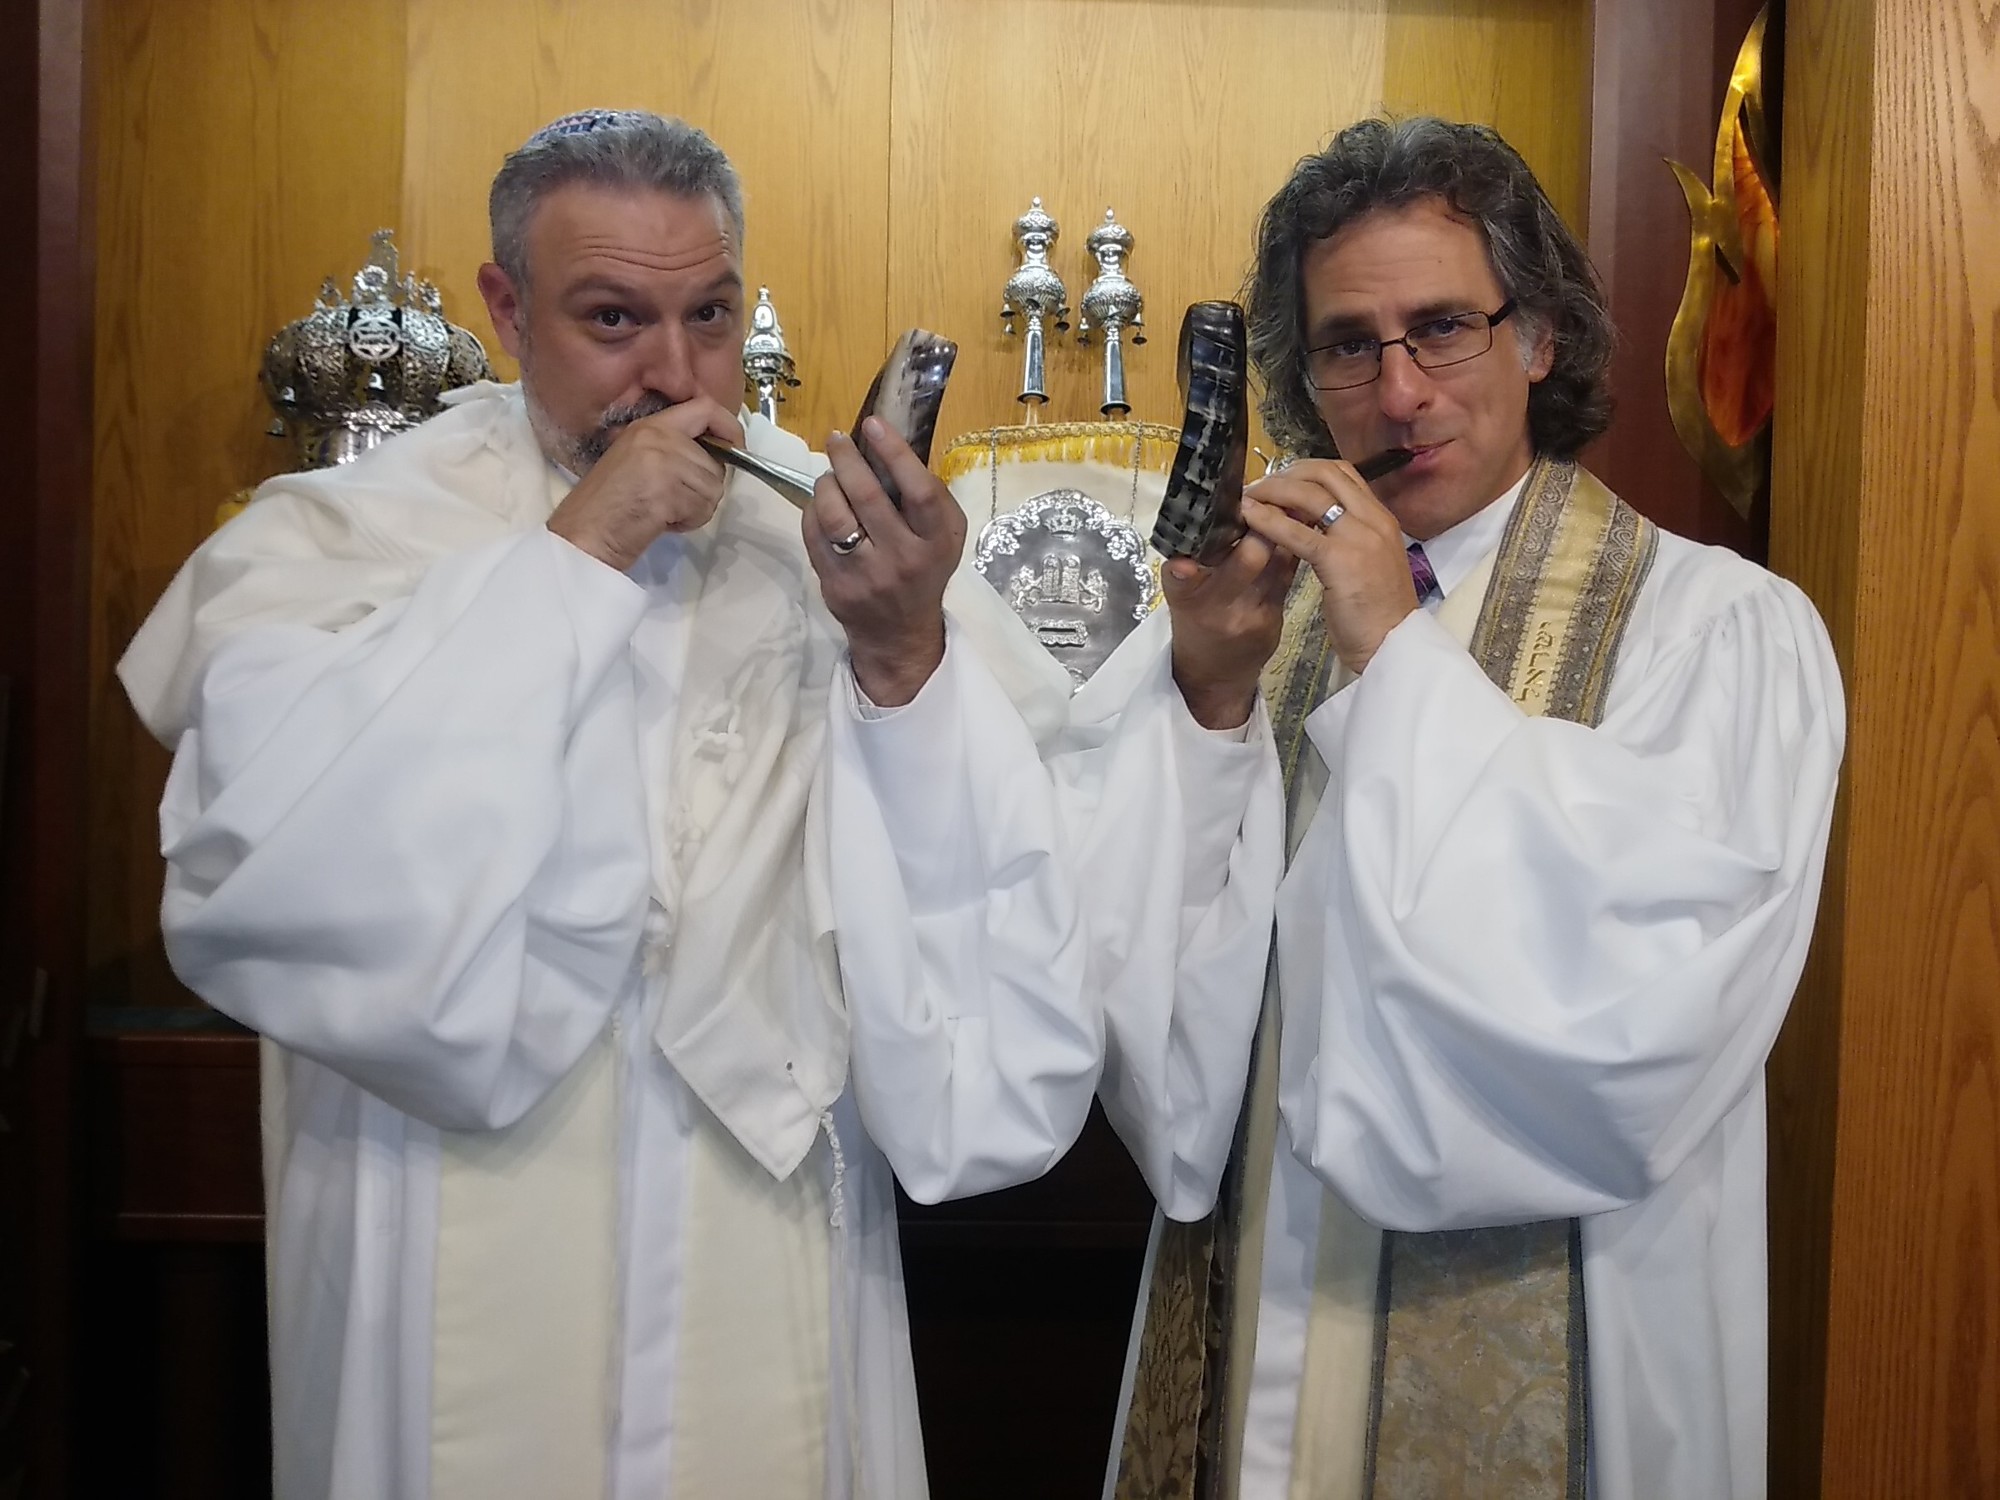 Temple Emanu-El Senior Rabbi Brenner Glickman and Associate Rabbi Michael Shefrin blow the shofar, the ritually-prepared ram’s horn that is traditionally sounded on the morning of Rosh Hashanah and at the very end of Yom Kippur.